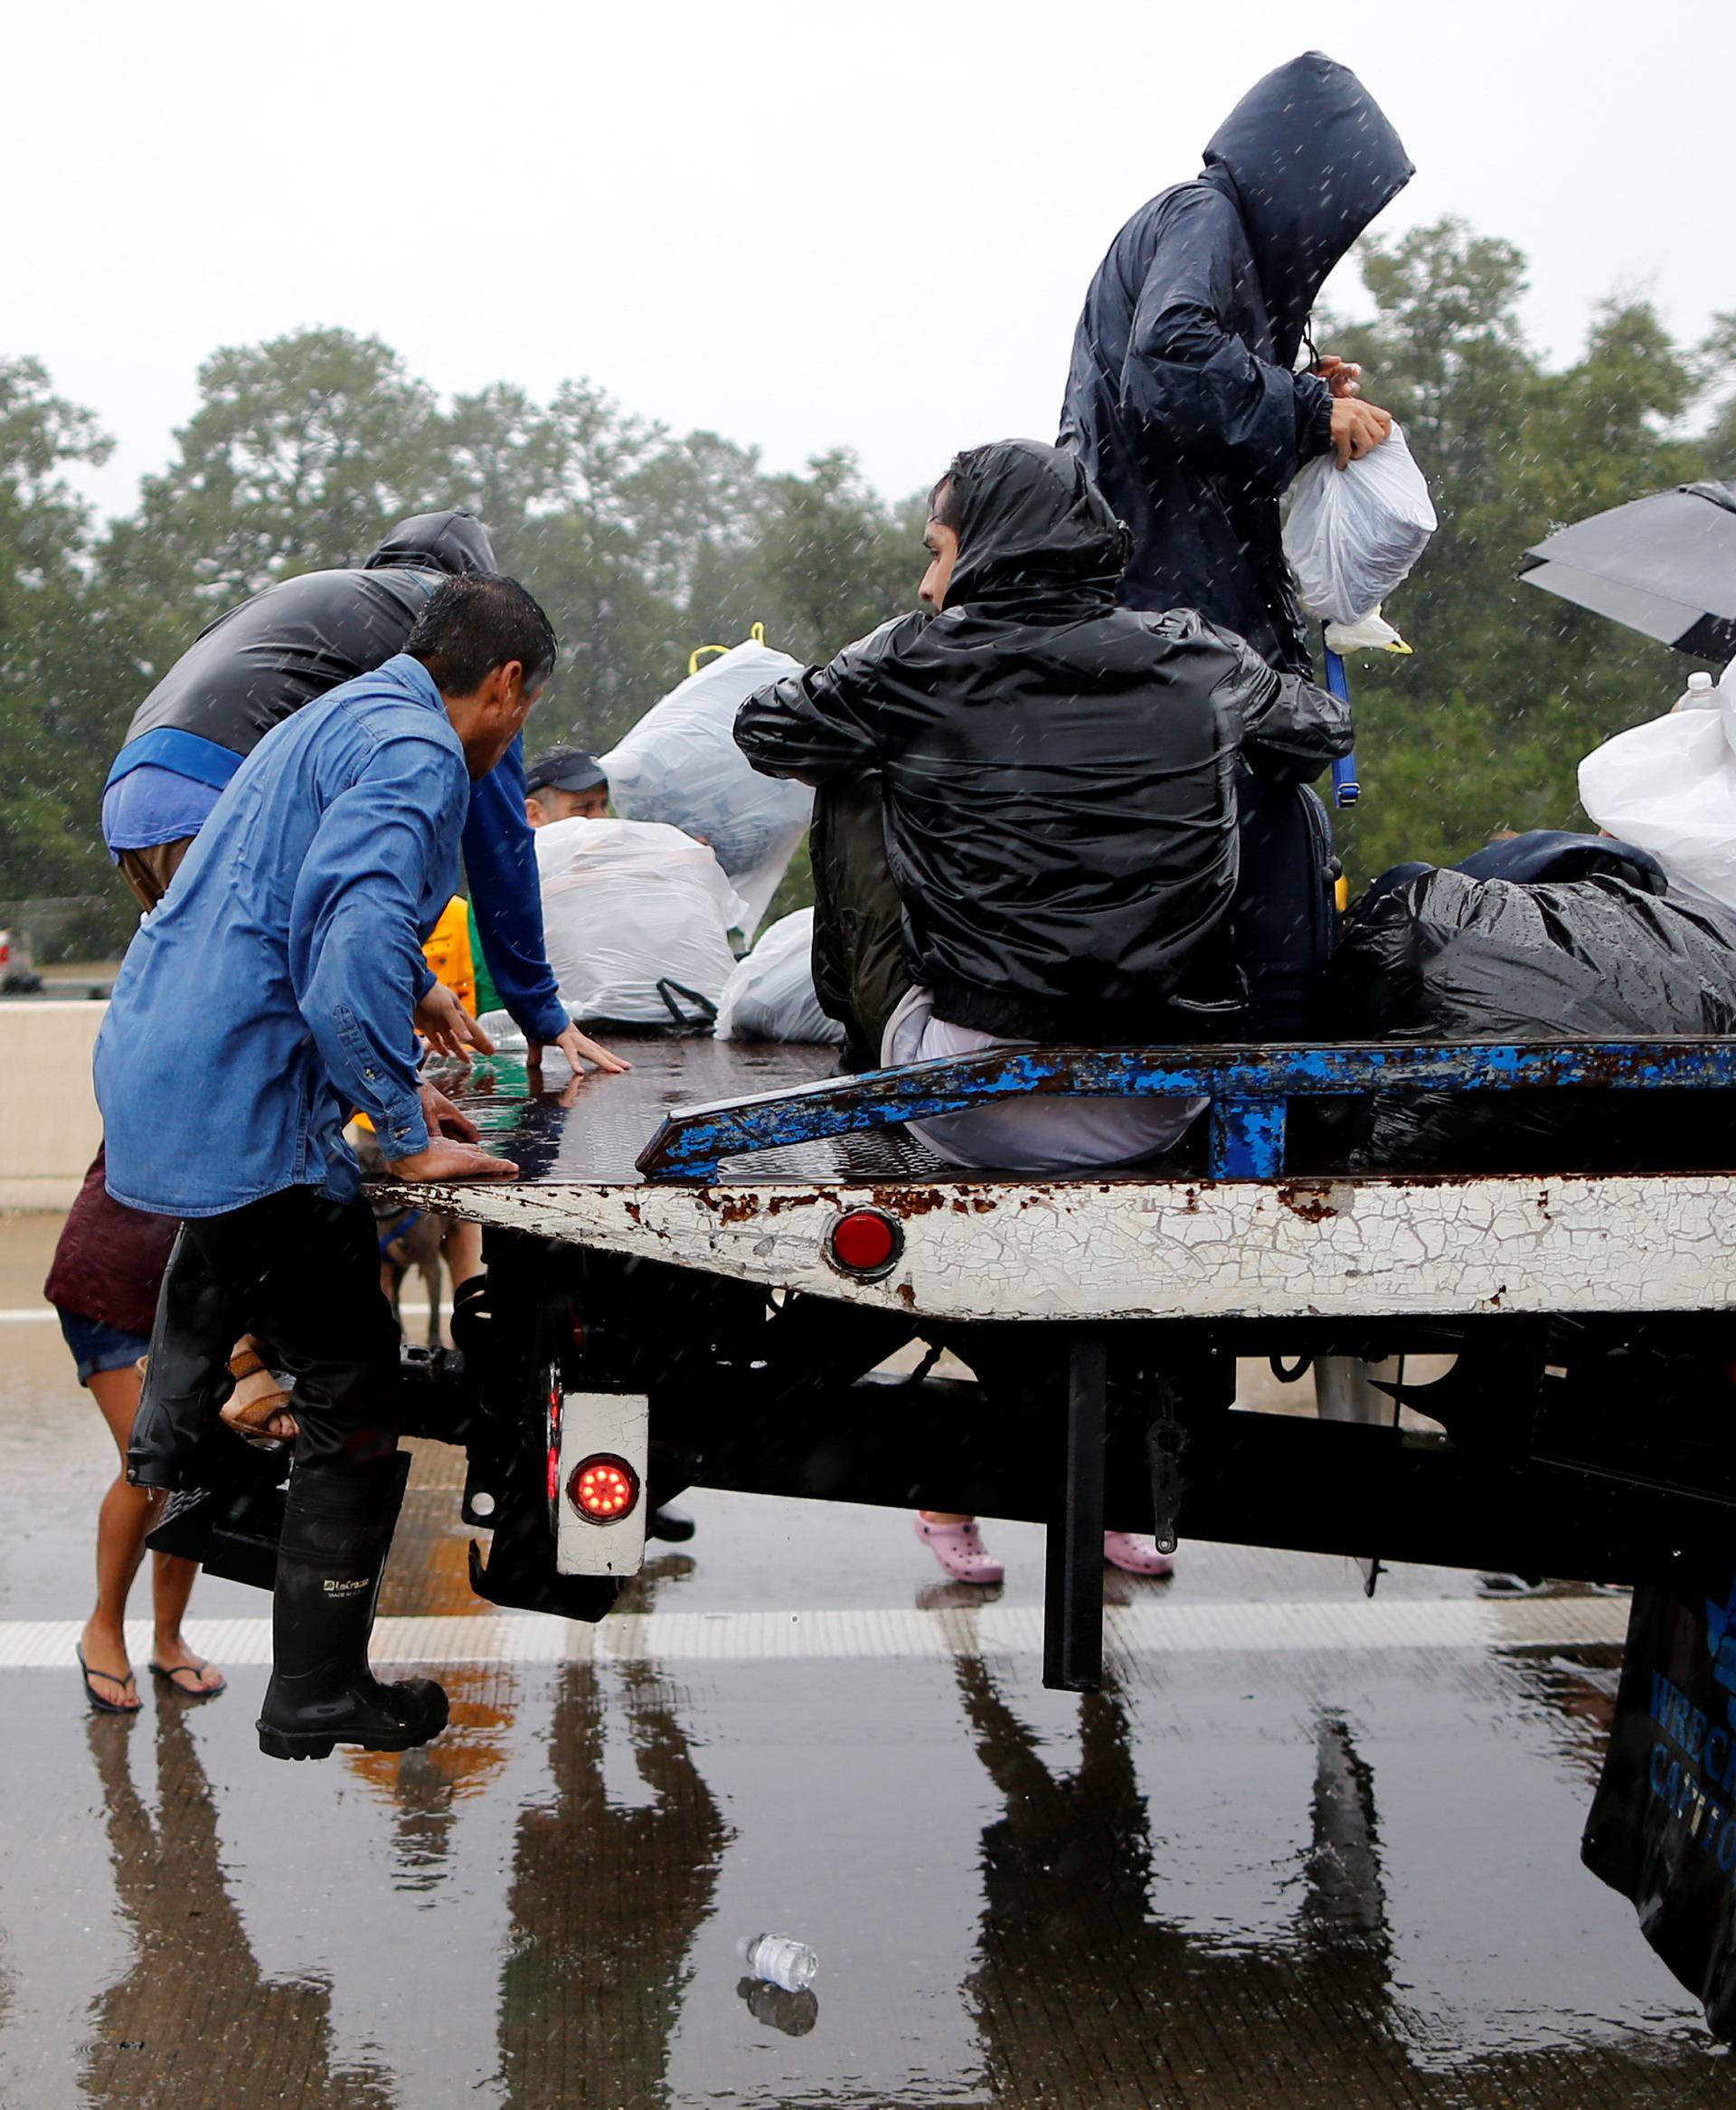 Residents board the bed of a tow truck after being rescued from the flood waters of tropical storm Harvey in east Houston